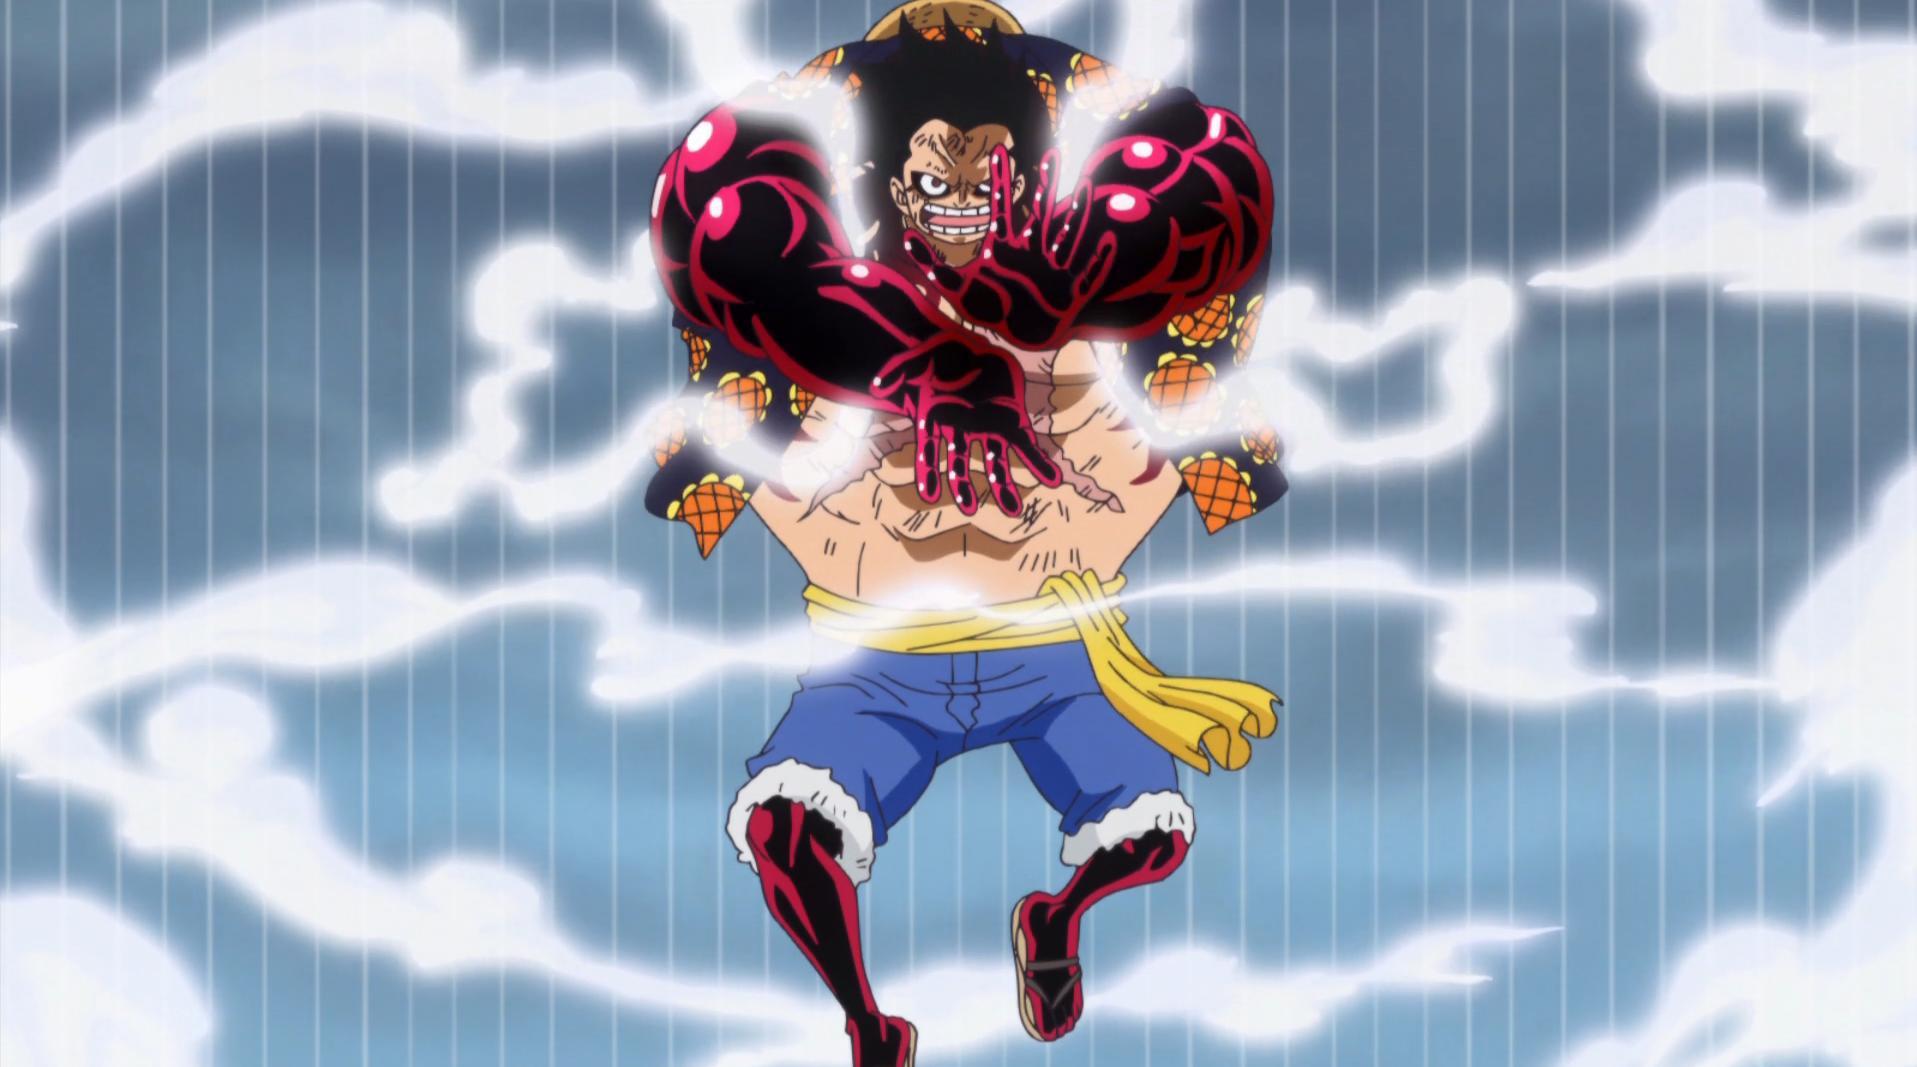 Luffy Gear 4 Snake Man Wallpapers Hd ✓ Wallpapers Directory.